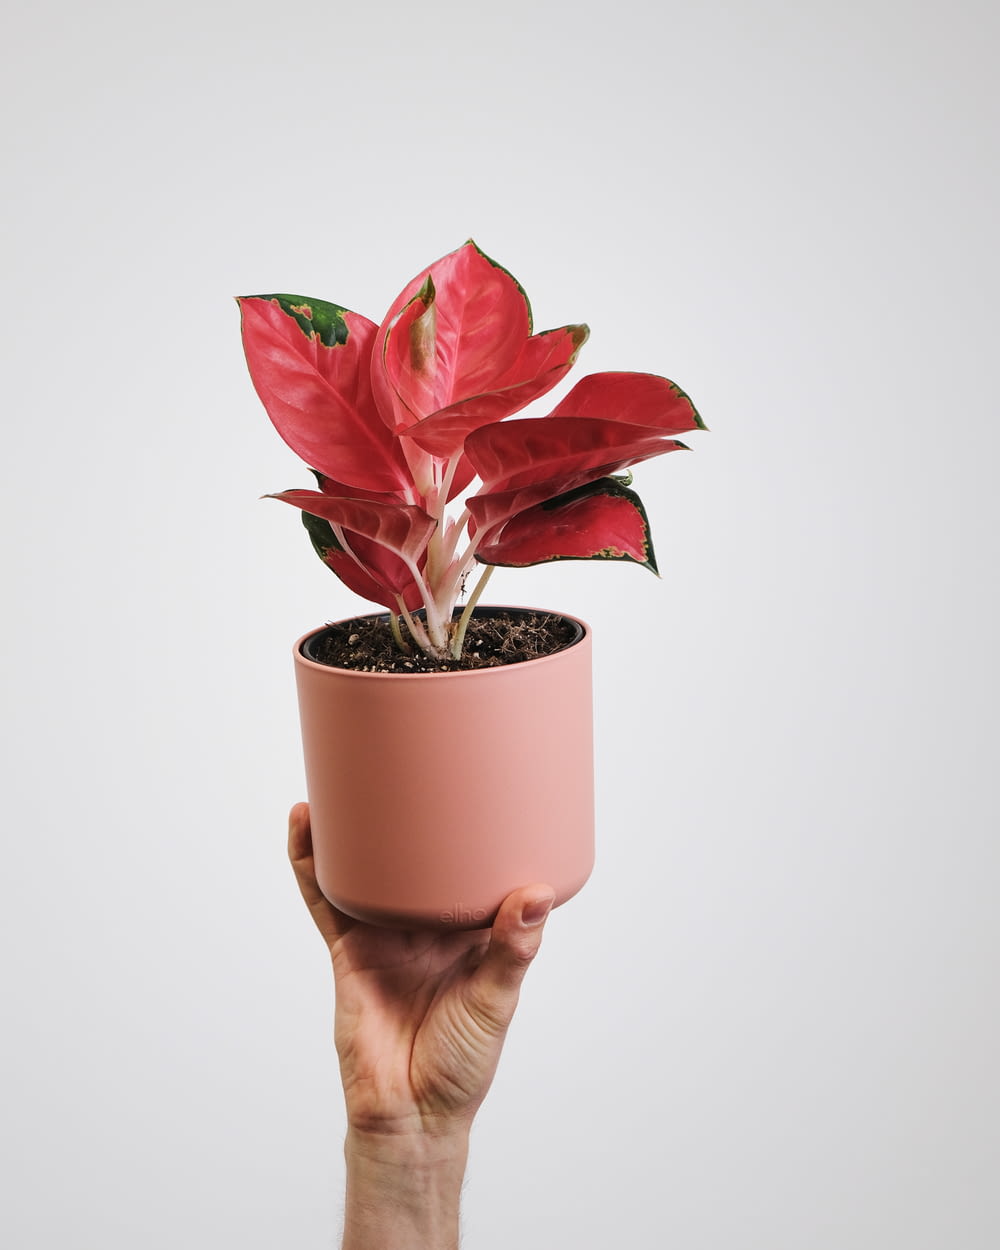 a hand holding a potted plant with red flowers